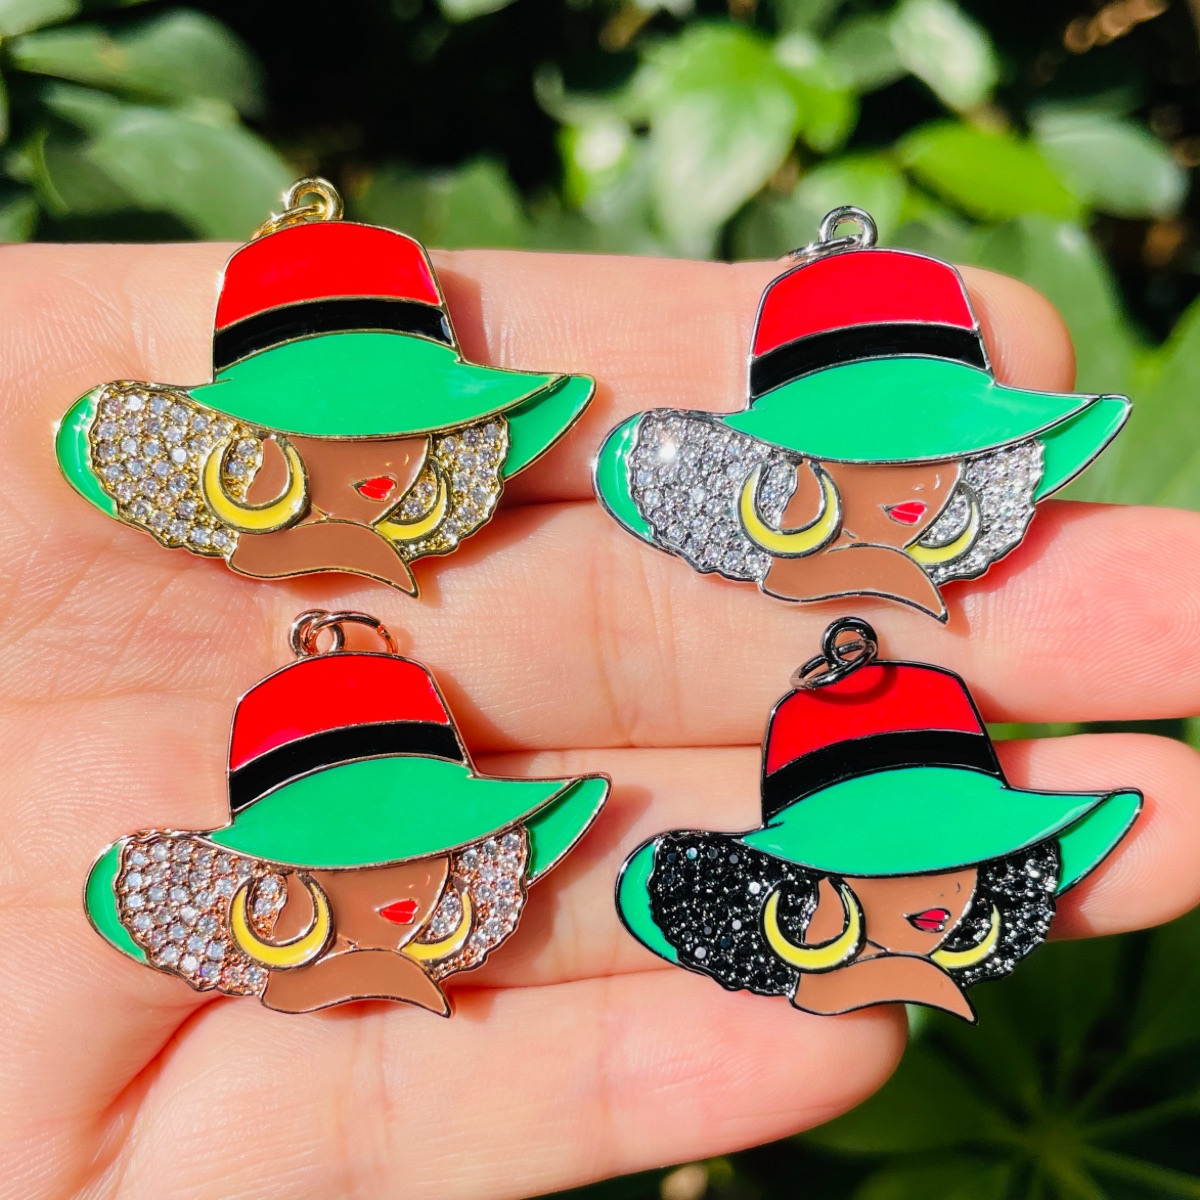 10pcs/lot CZ Paved Red Black Green Hat Afro Black Girl Charms for Juneteenth Awareness Mix Colors CZ Paved Charms Afro Girl/Queen Charms Juneteenth & Black History Month Awareness New Charms Arrivals Charms Beads Beyond